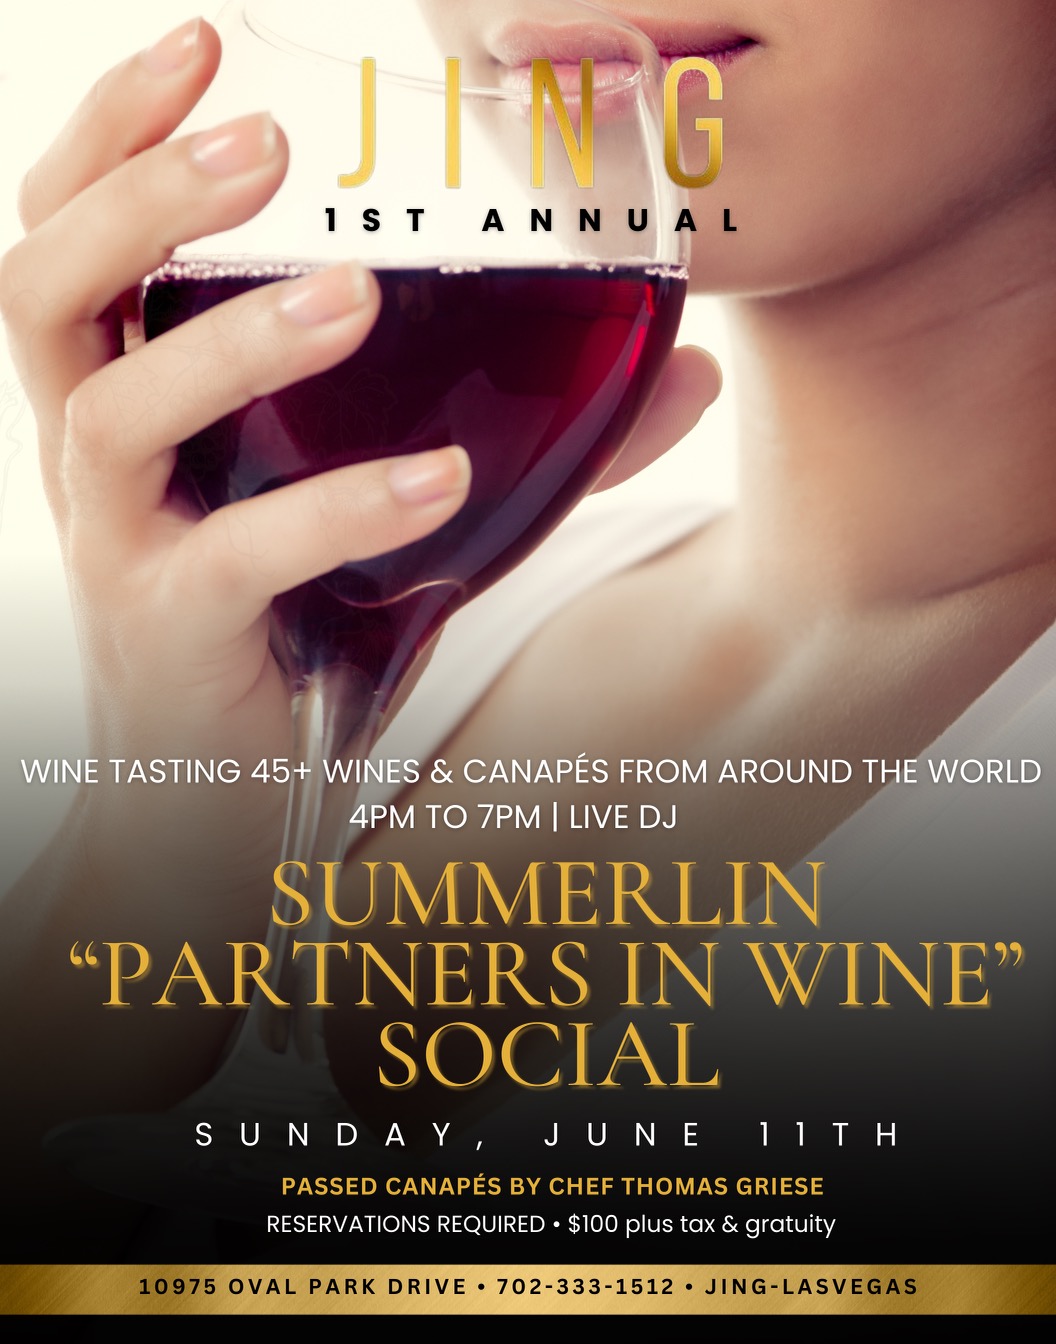 Experience an Unforgettable Evening of Fine Wines at the Summerlin "Partners in Wine" Mixer at JING in Downtown Summerlin